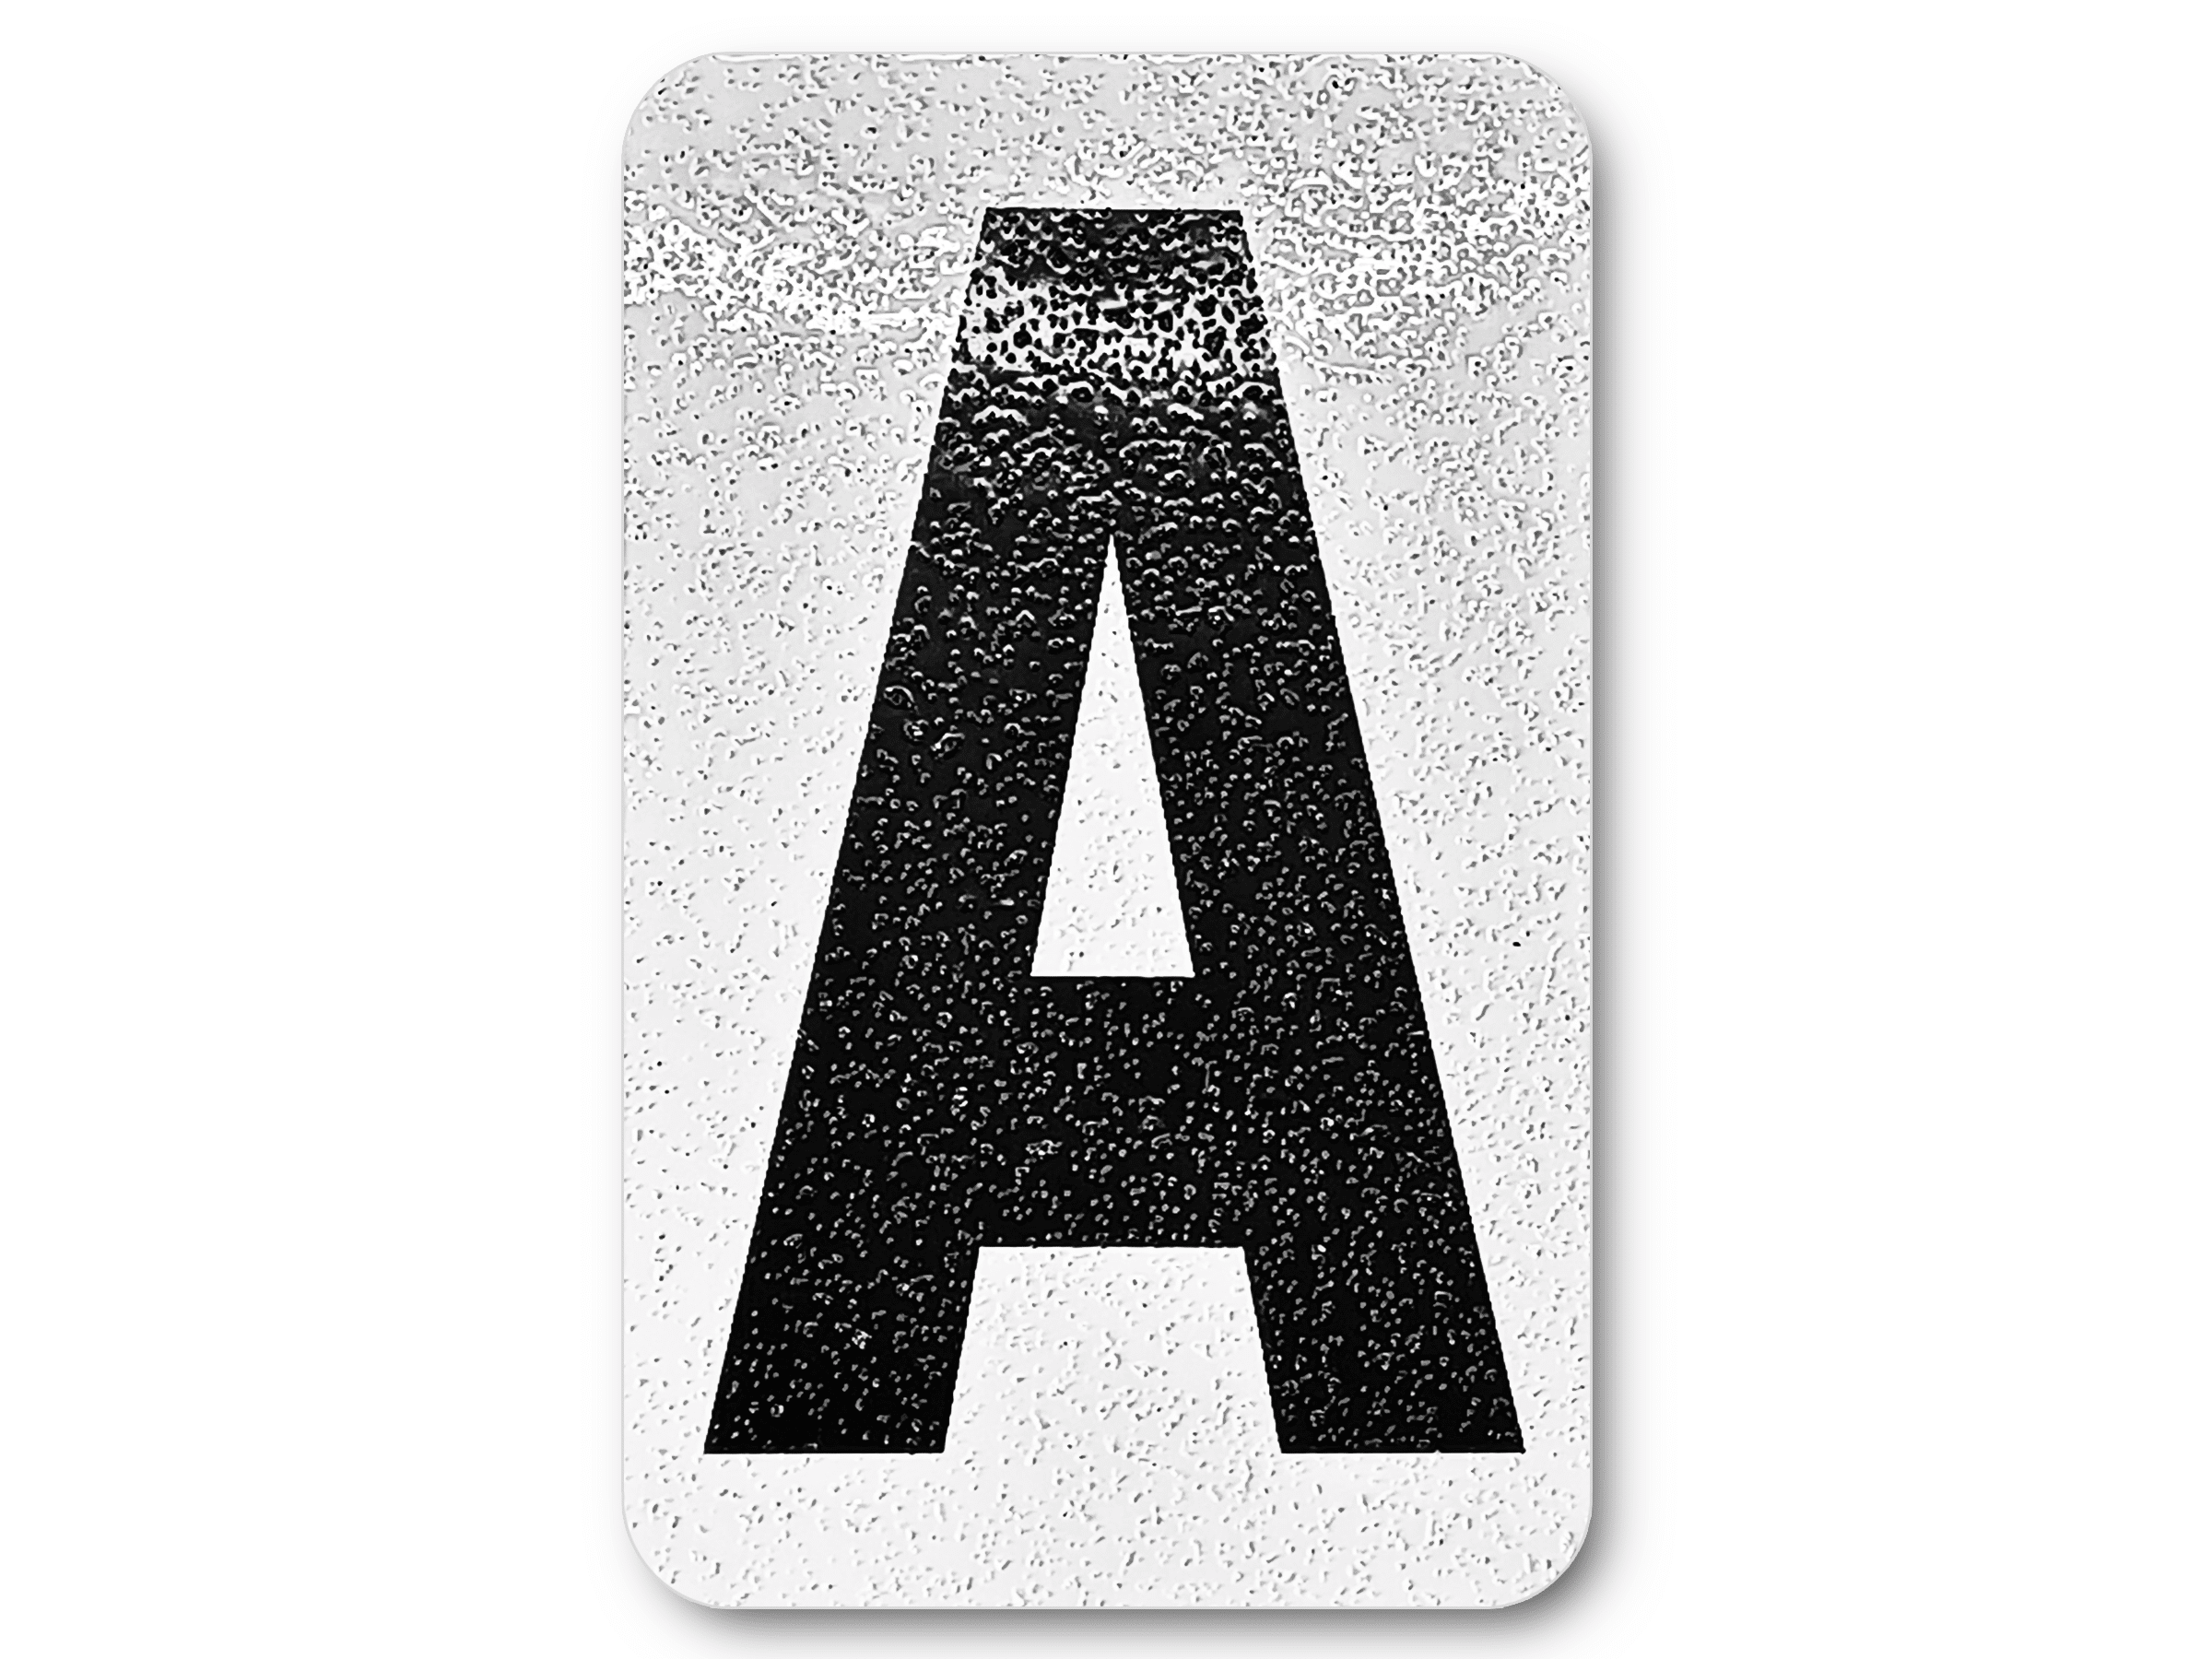 12 Sheets Large Letter Stickers Vinyl Self-Adhesive Number Alphabet Vinyl Stickers, Mailbox Numbers Labels DIY Crafts Art Making, 0.8-1.6 inch Self